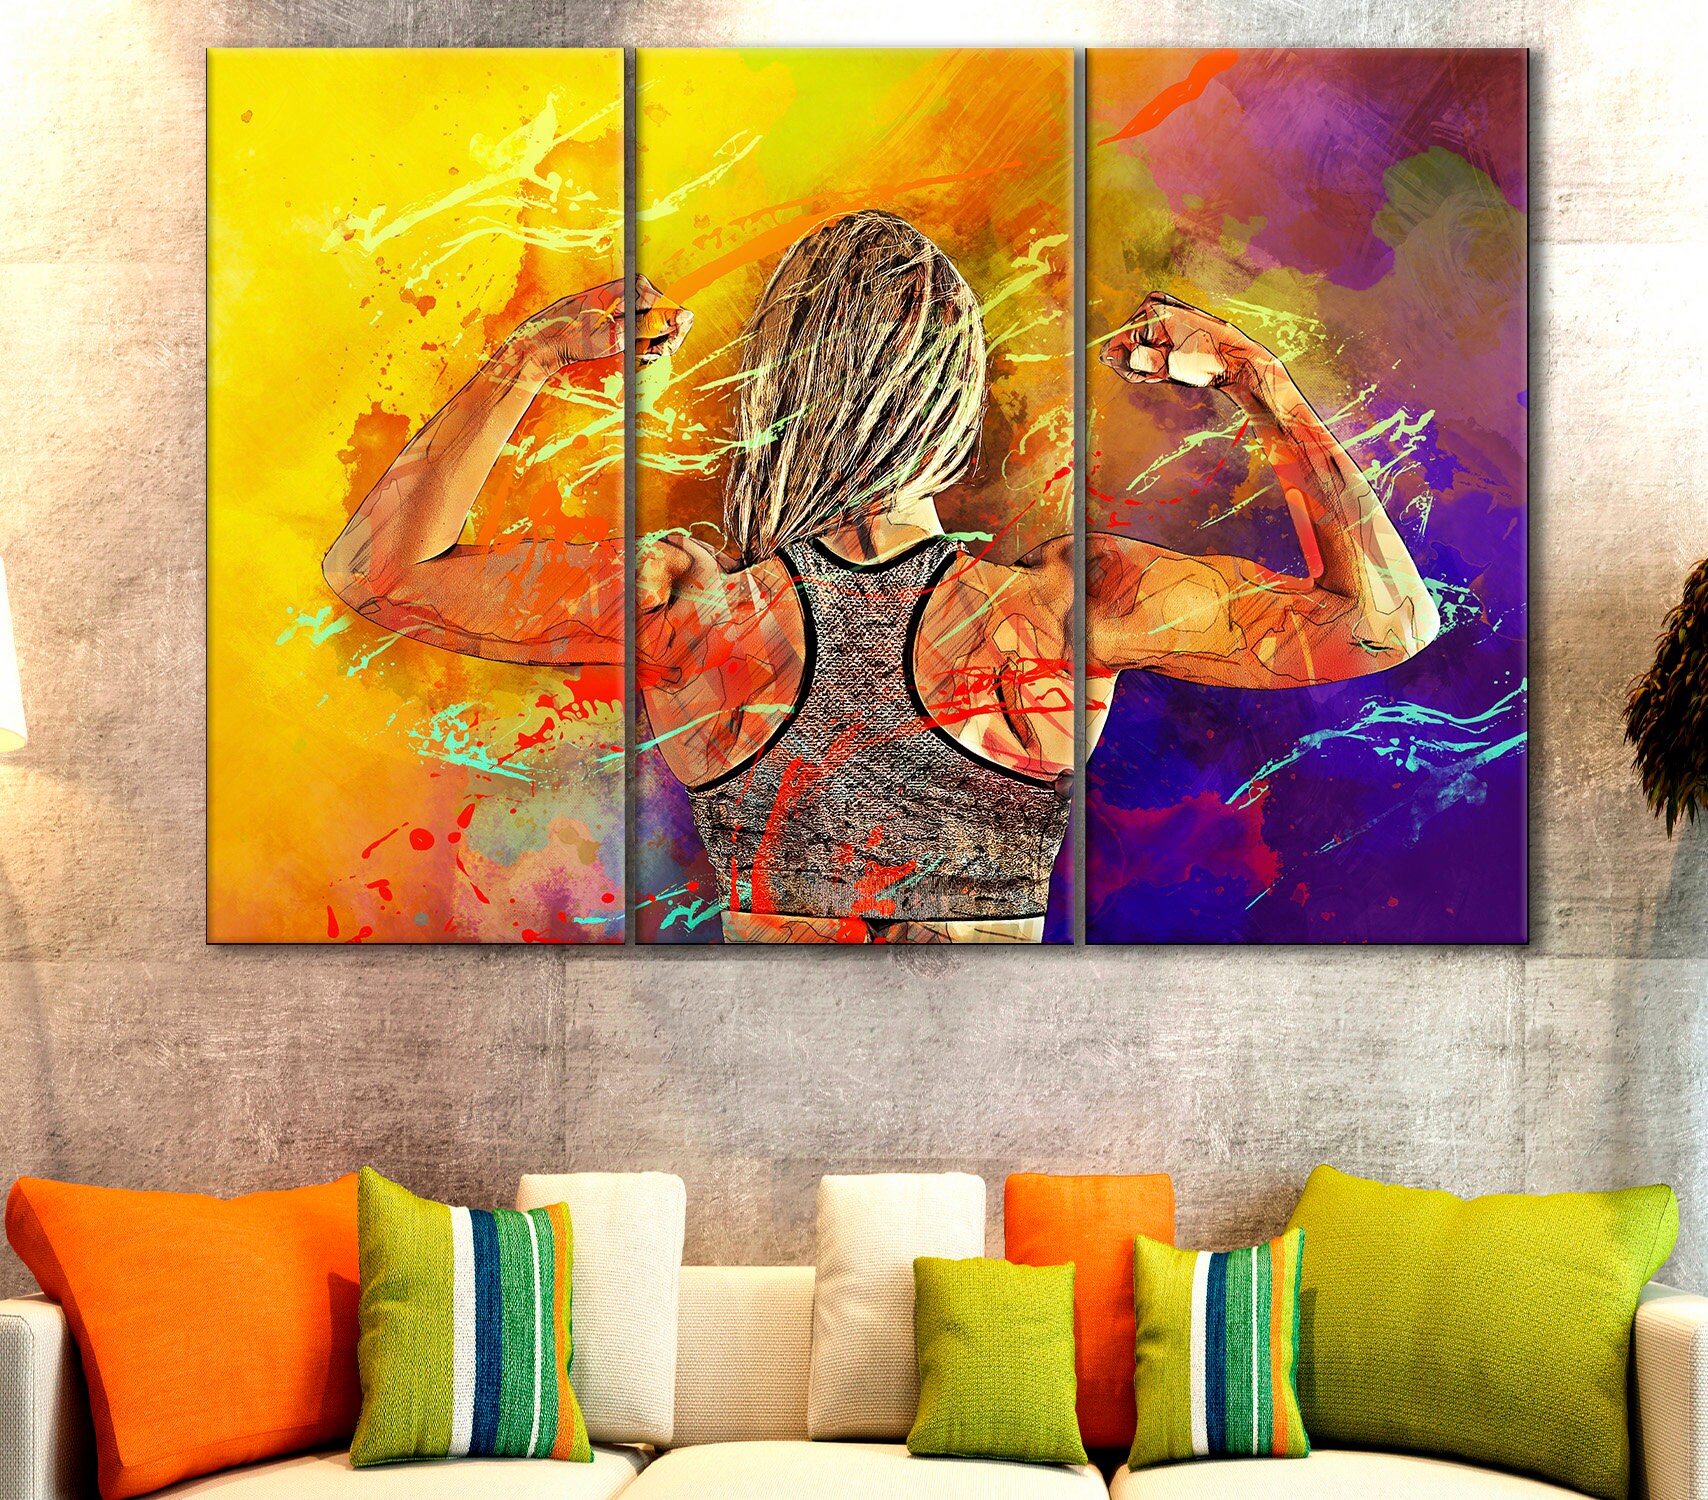 Gym Lover Gift Gym Is My New Girlfriend Workout Canvas Print / Canvas Art  by Jeff Creation - Fine Art America